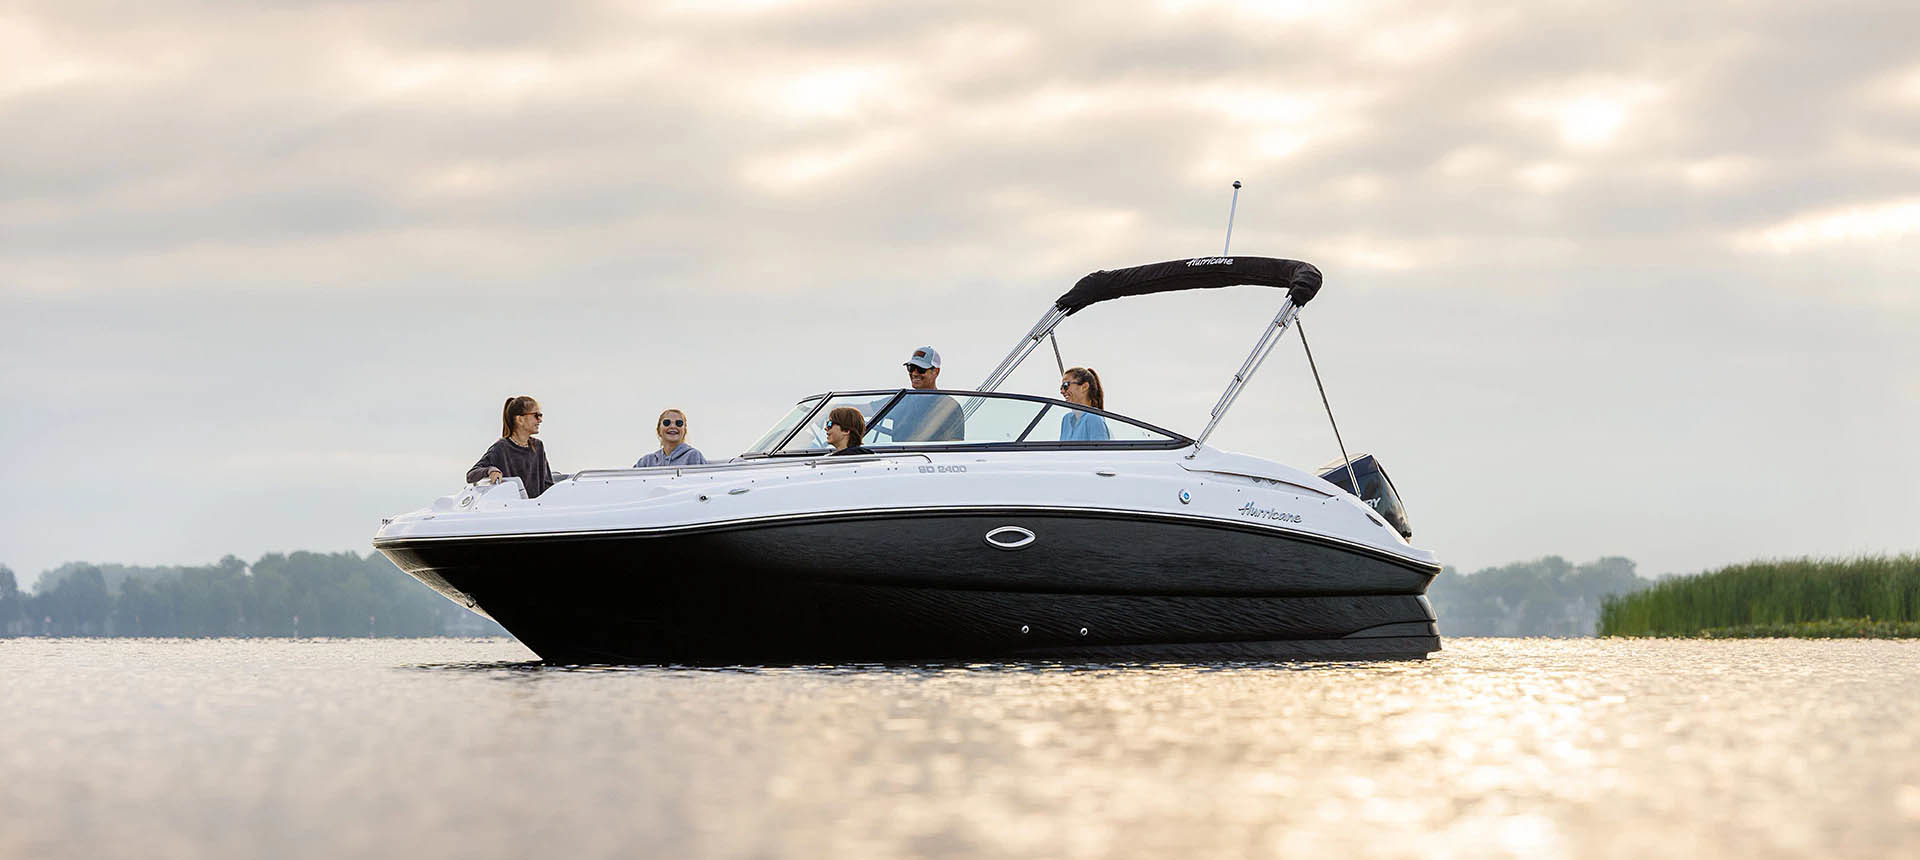 2015 Hurricane SunDeck SD 2400 IO Deck Boat Boat Review 